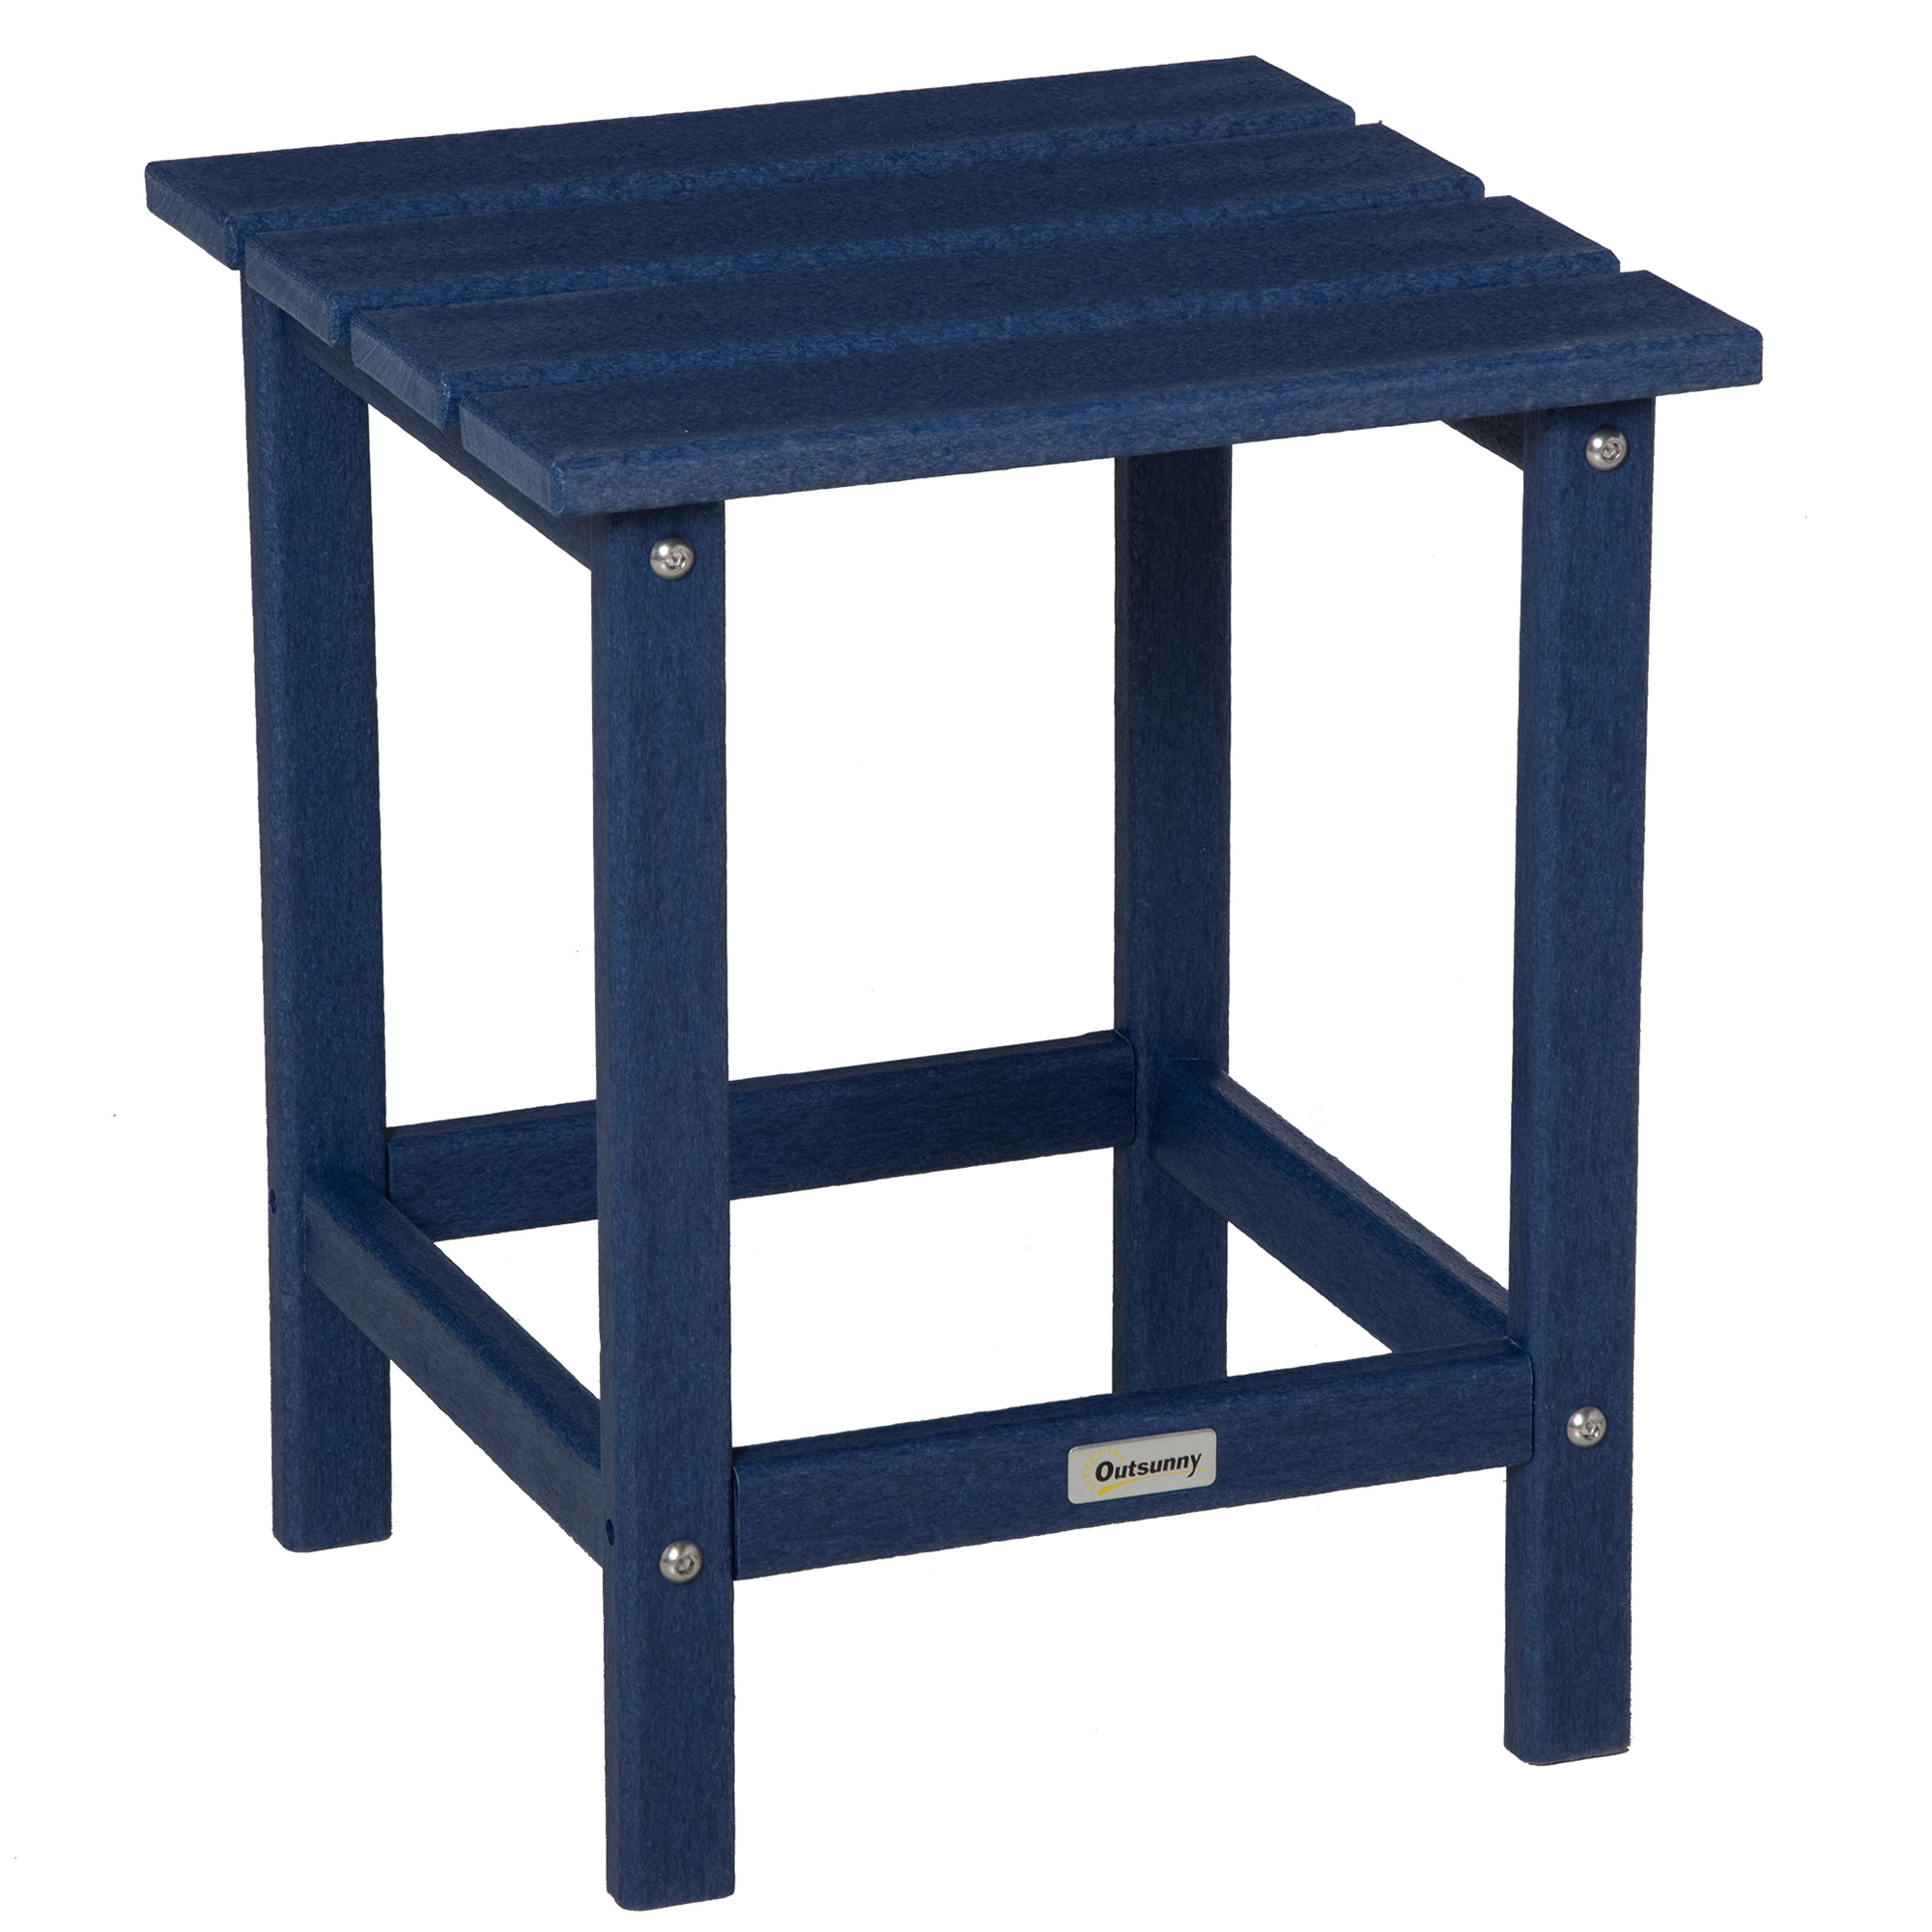 Outsunny 15" Patio End Table, HDPE Plastic, Blue - image 1 of 9